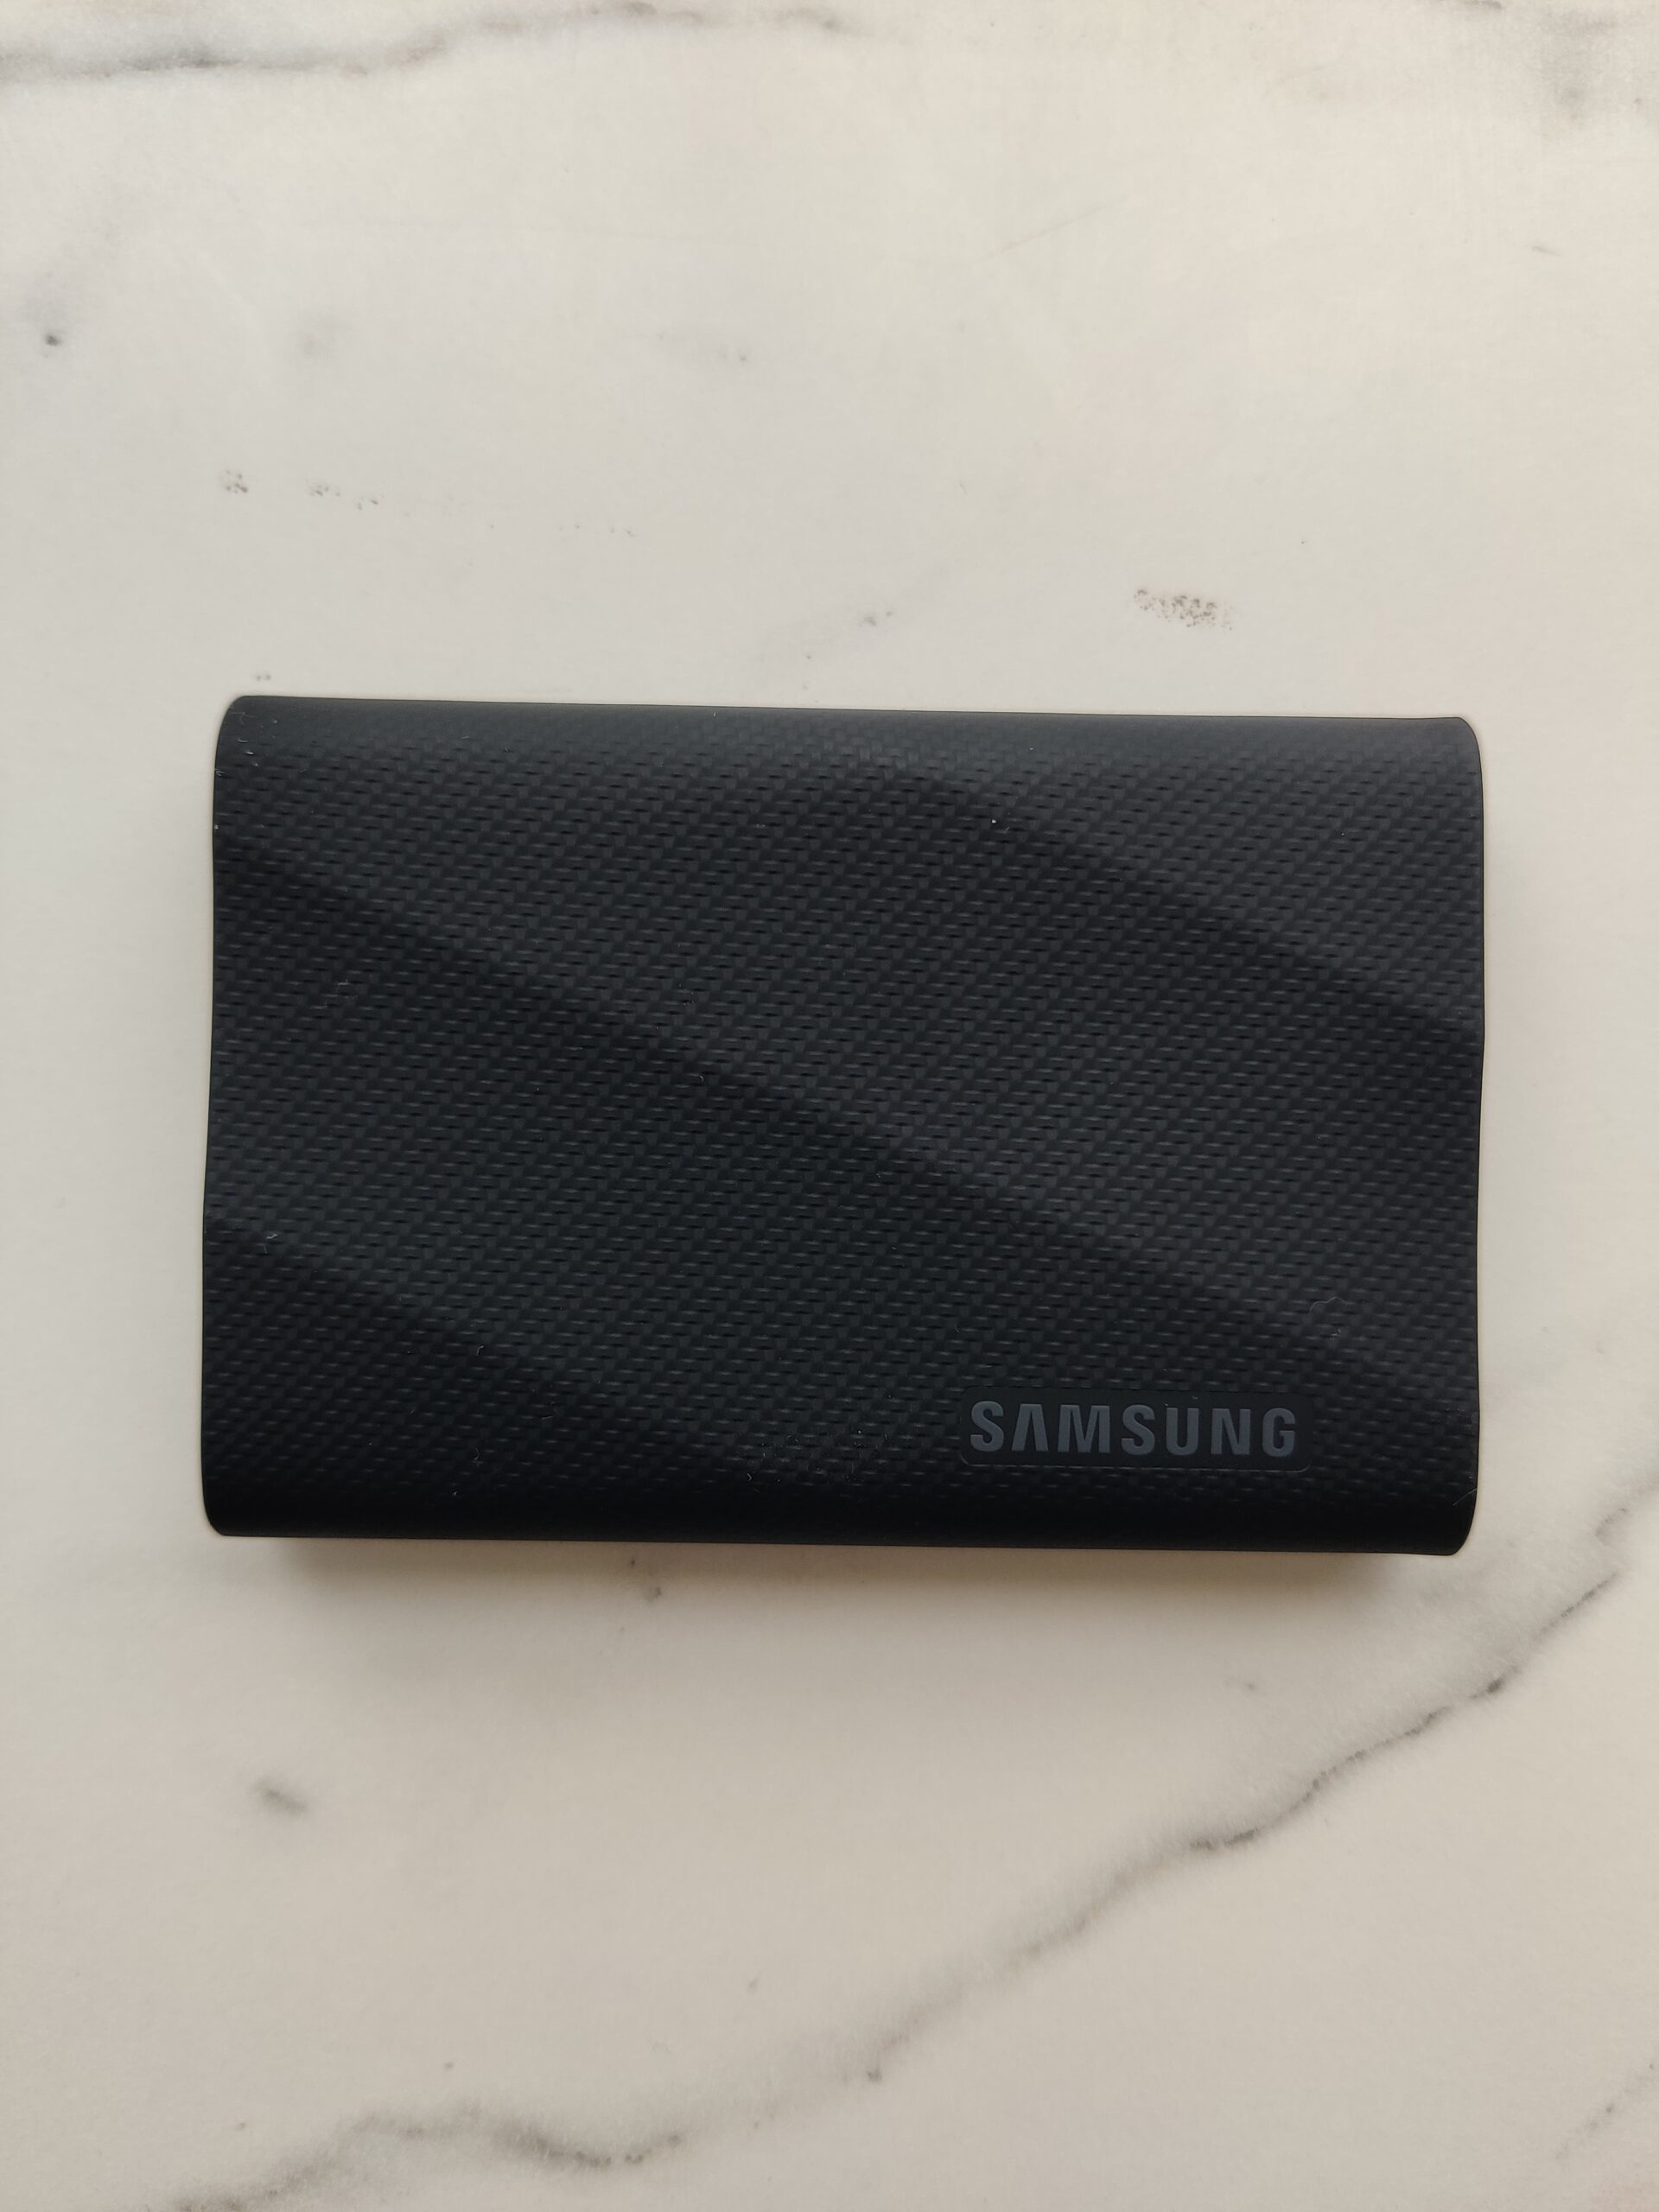 Samsung Portable SSD T9 Review: Rapid as Lightning!